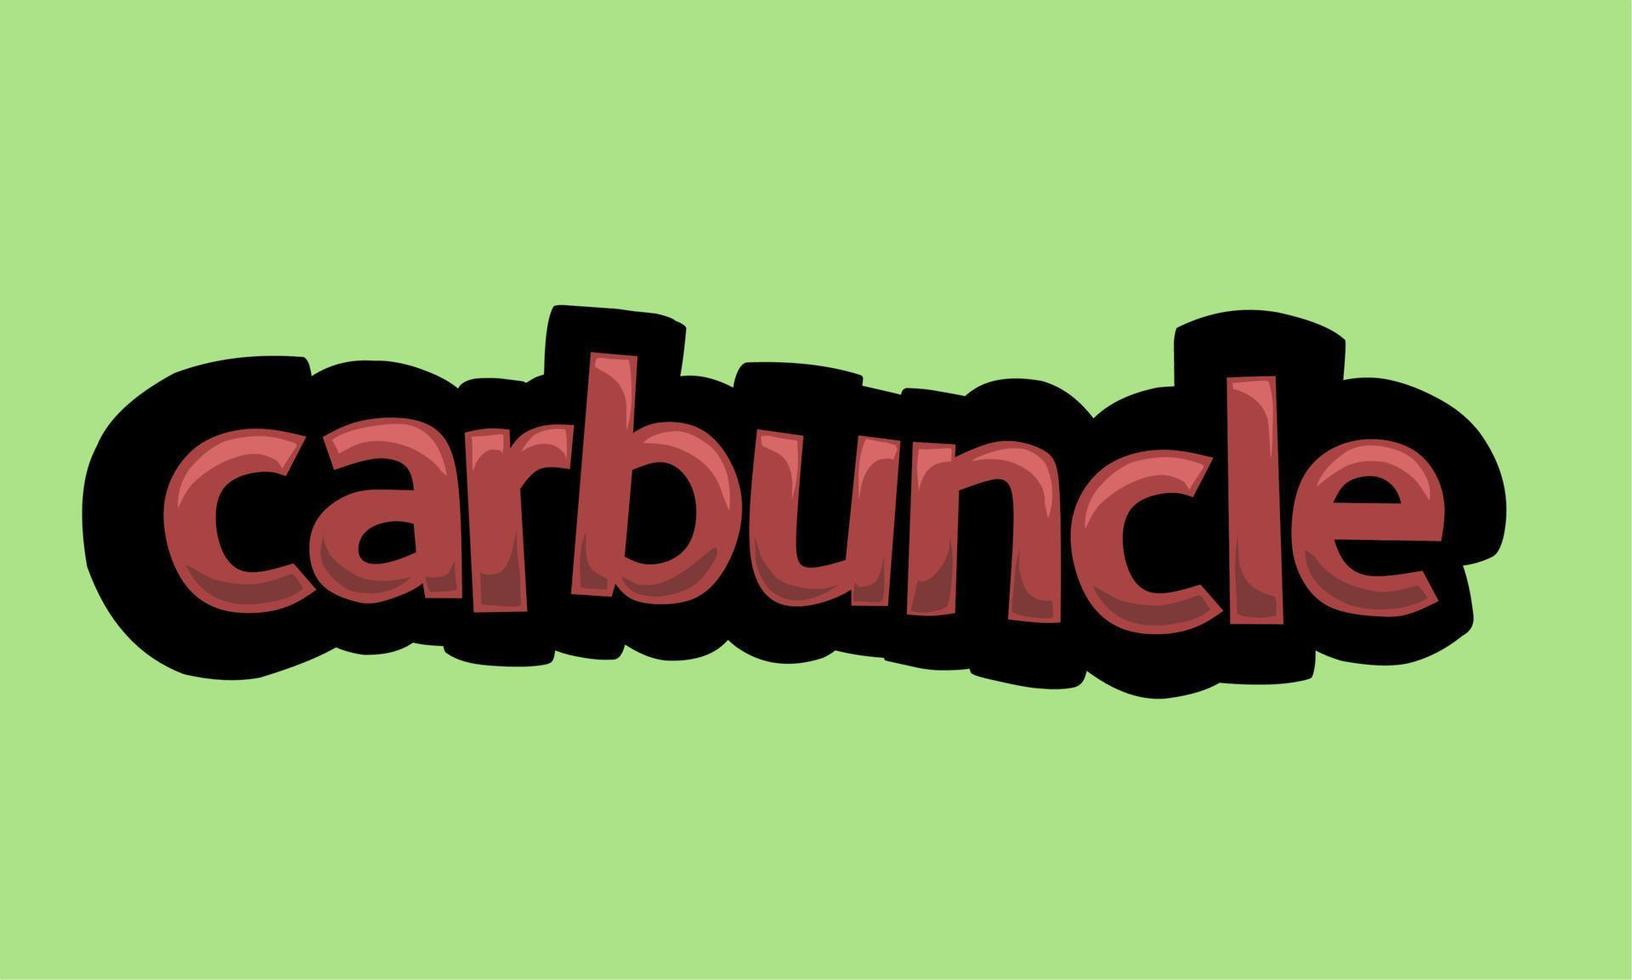 CARBUNCLE writing vector design on a green background